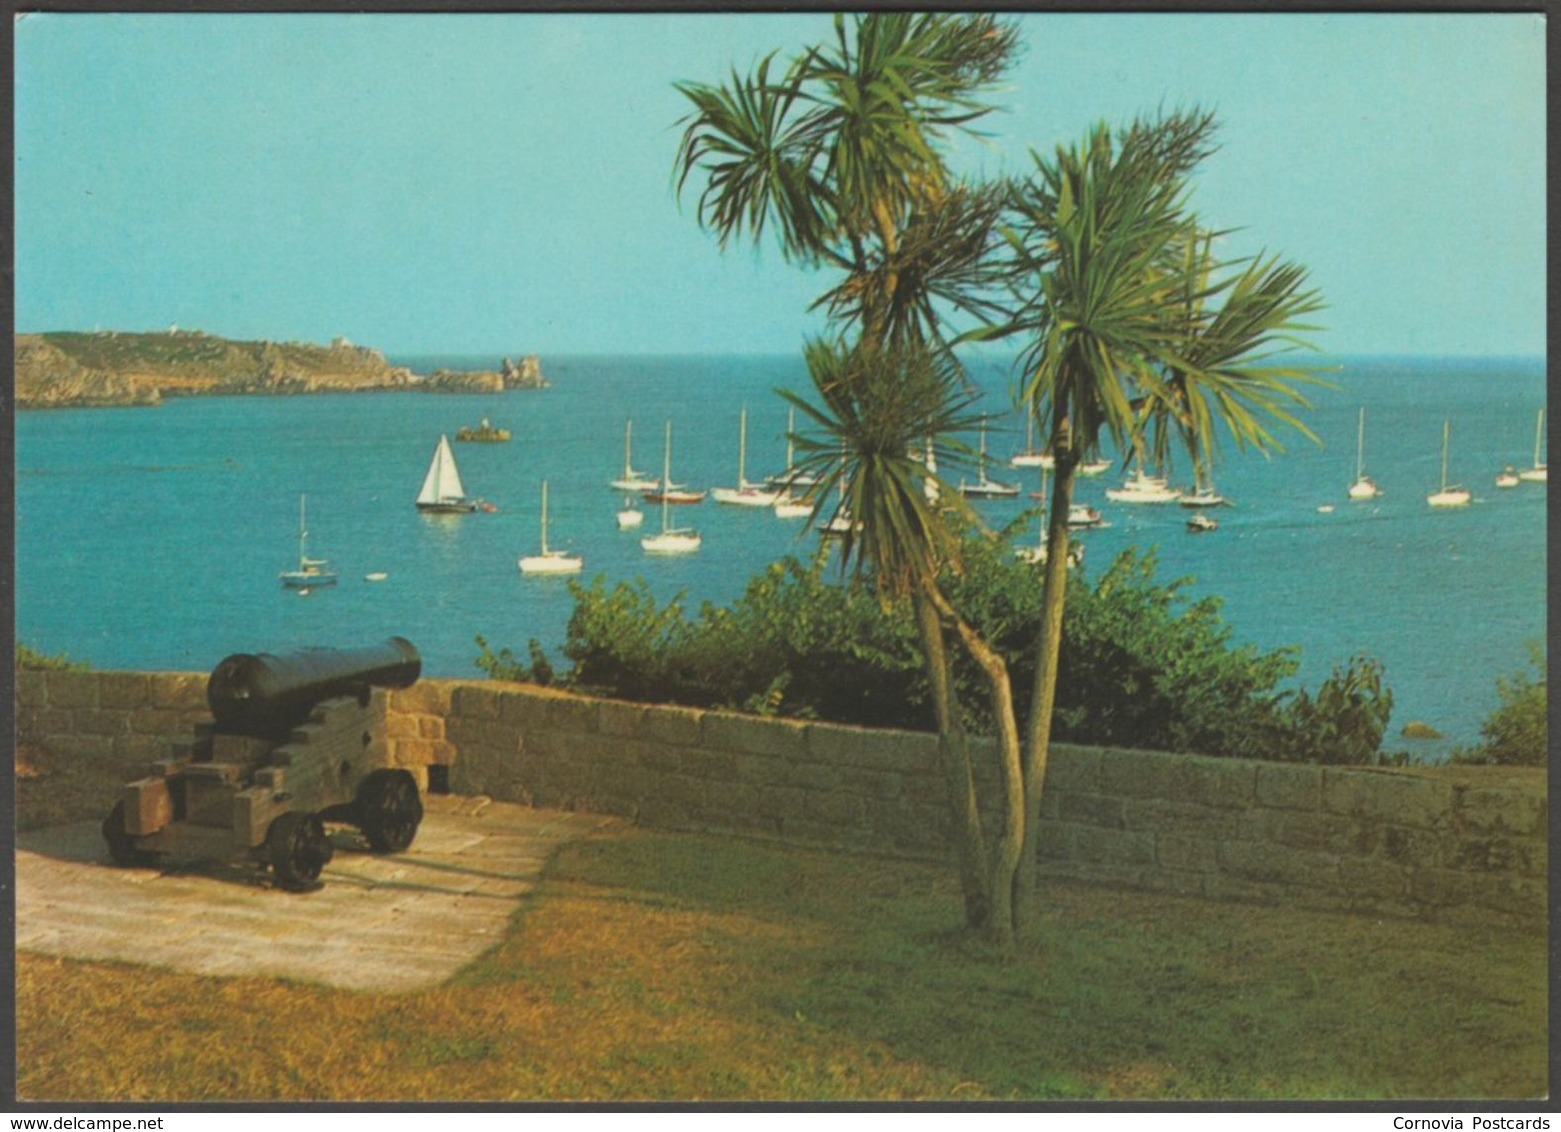 Porthcressa Bay From The Garrison, St Mary's, Isles Of Scilly, C.1980 - Gibson Postcard - Scilly Isles